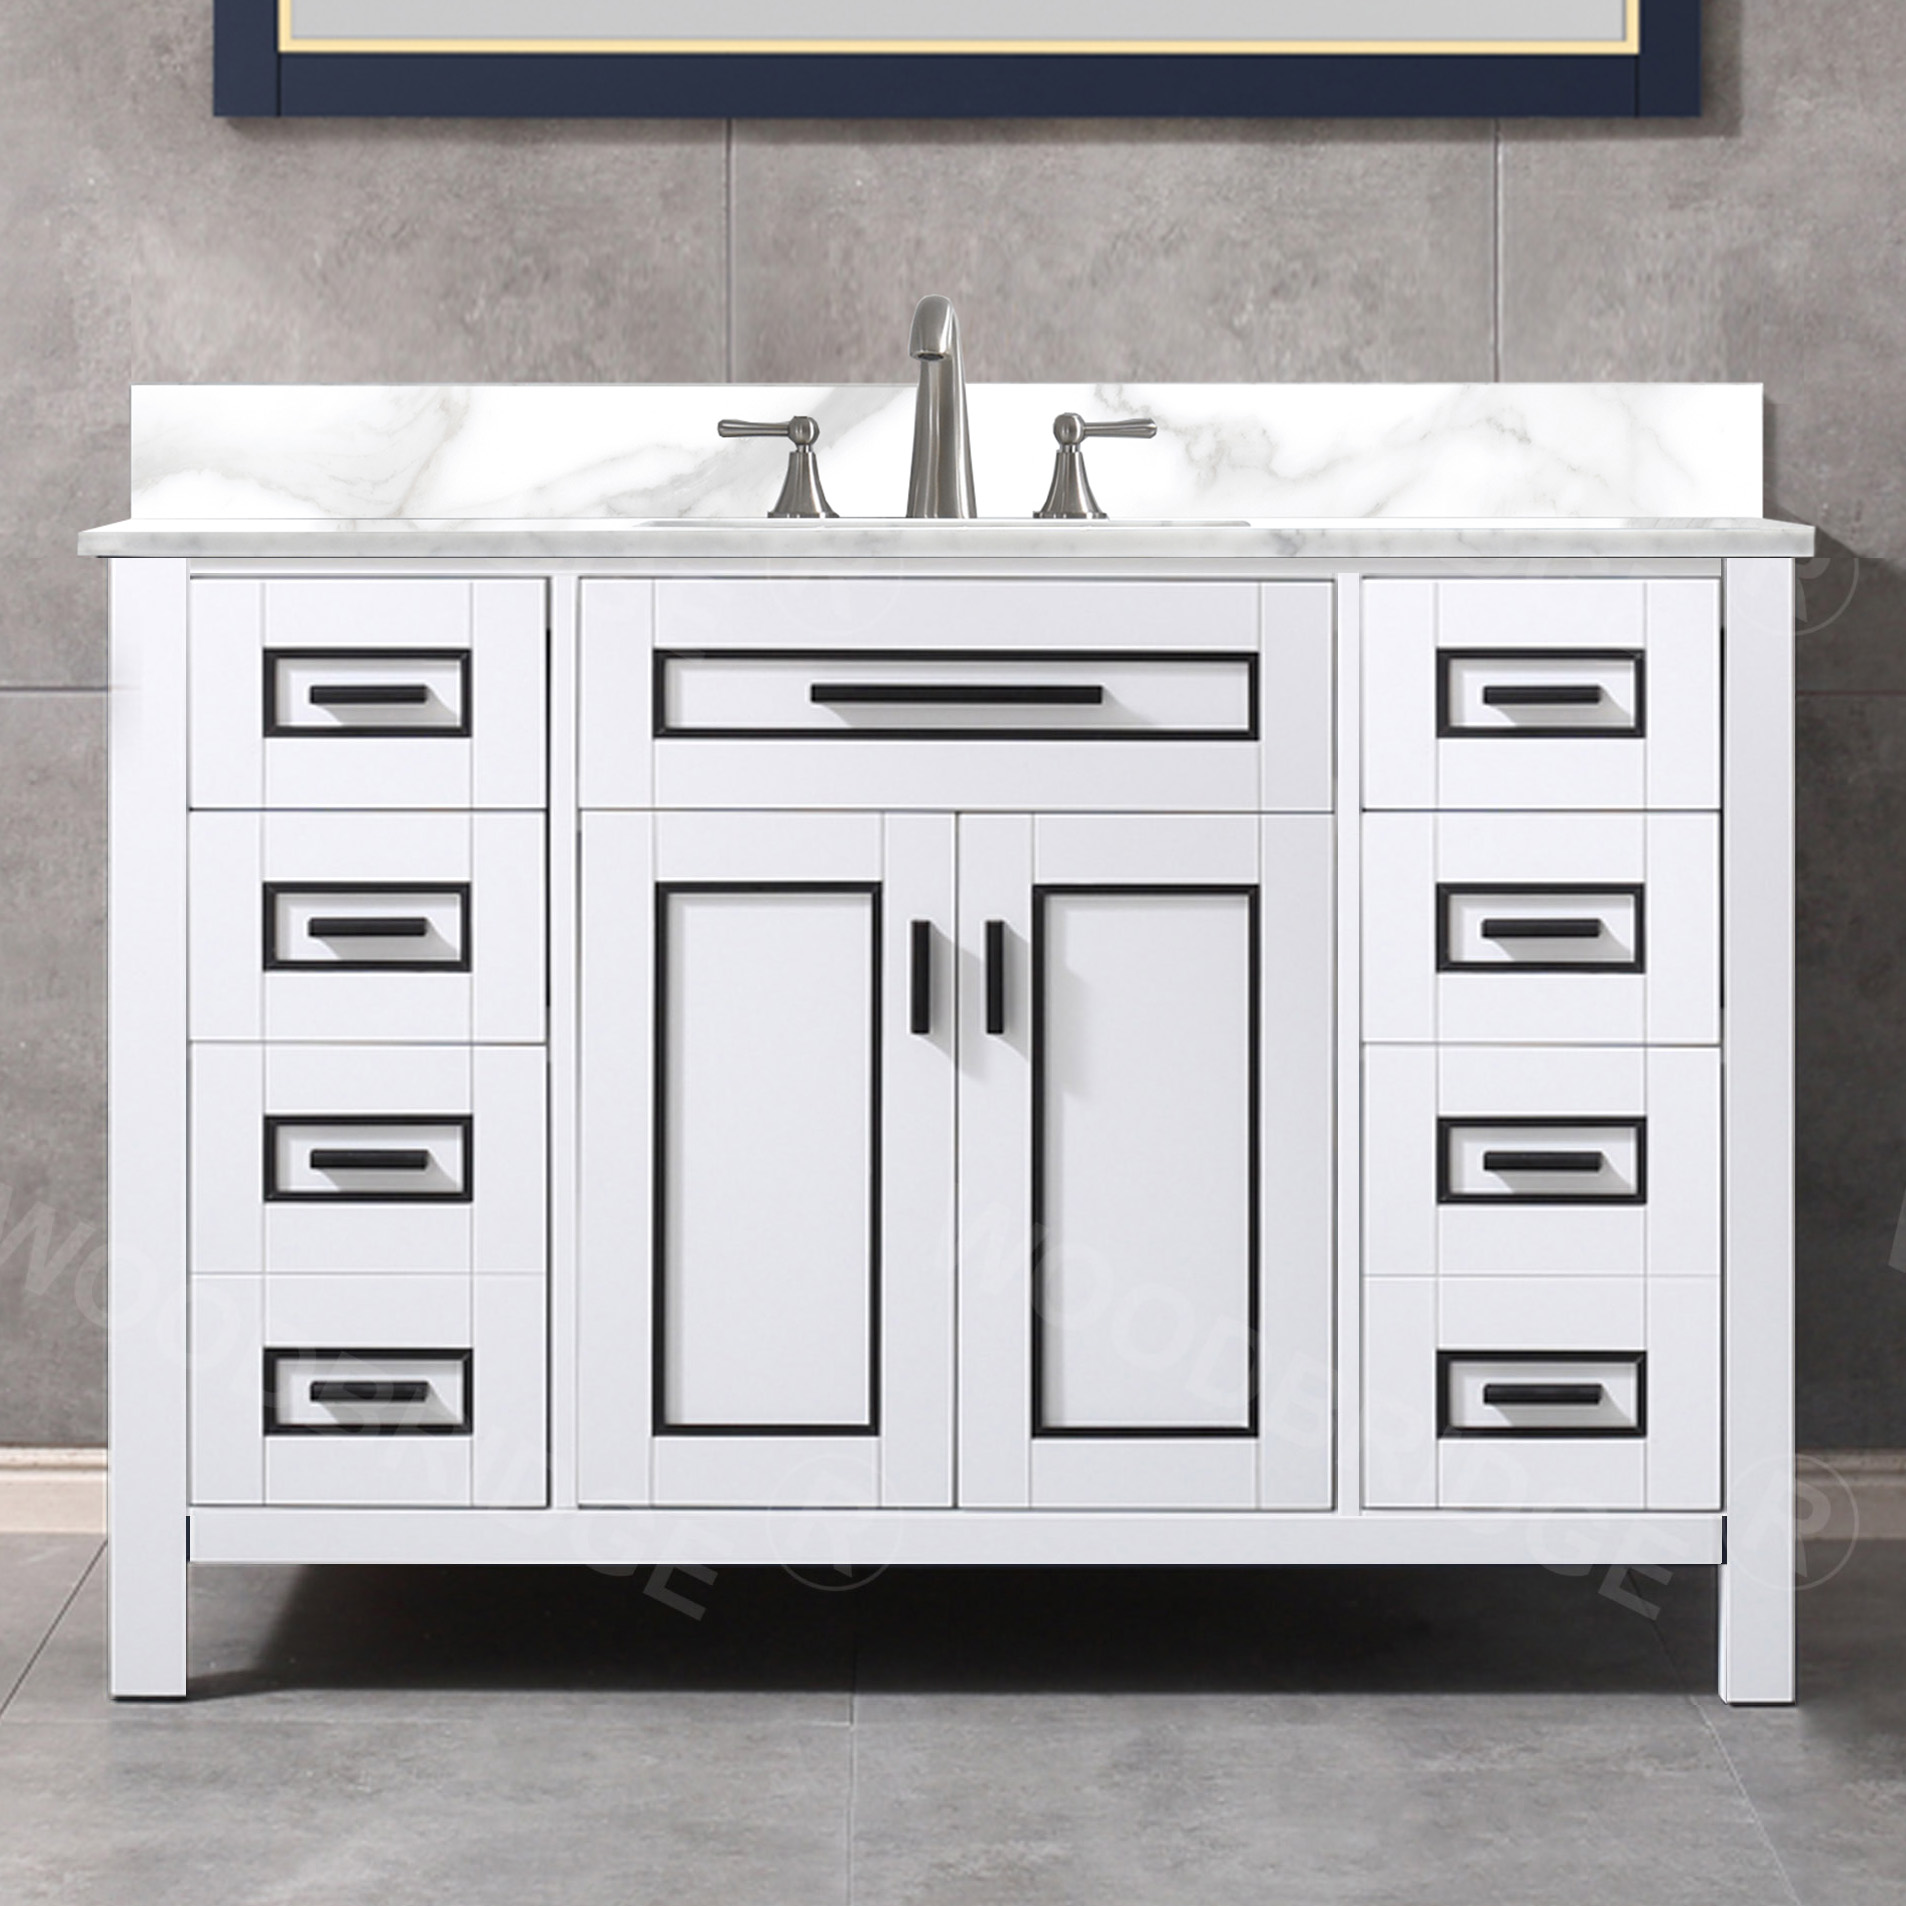 WOODBRIDGE Milan  49” Floor Mounted Single Basin Vanity Set with Solid Wood Cabinet in White and Engineered stone composite Vanity Top in Fish Belly White with Pre-installed Undermount Rectangle Bathroom Sink and Pre-Drilled 3-Hole for 4” Centerset Faucet